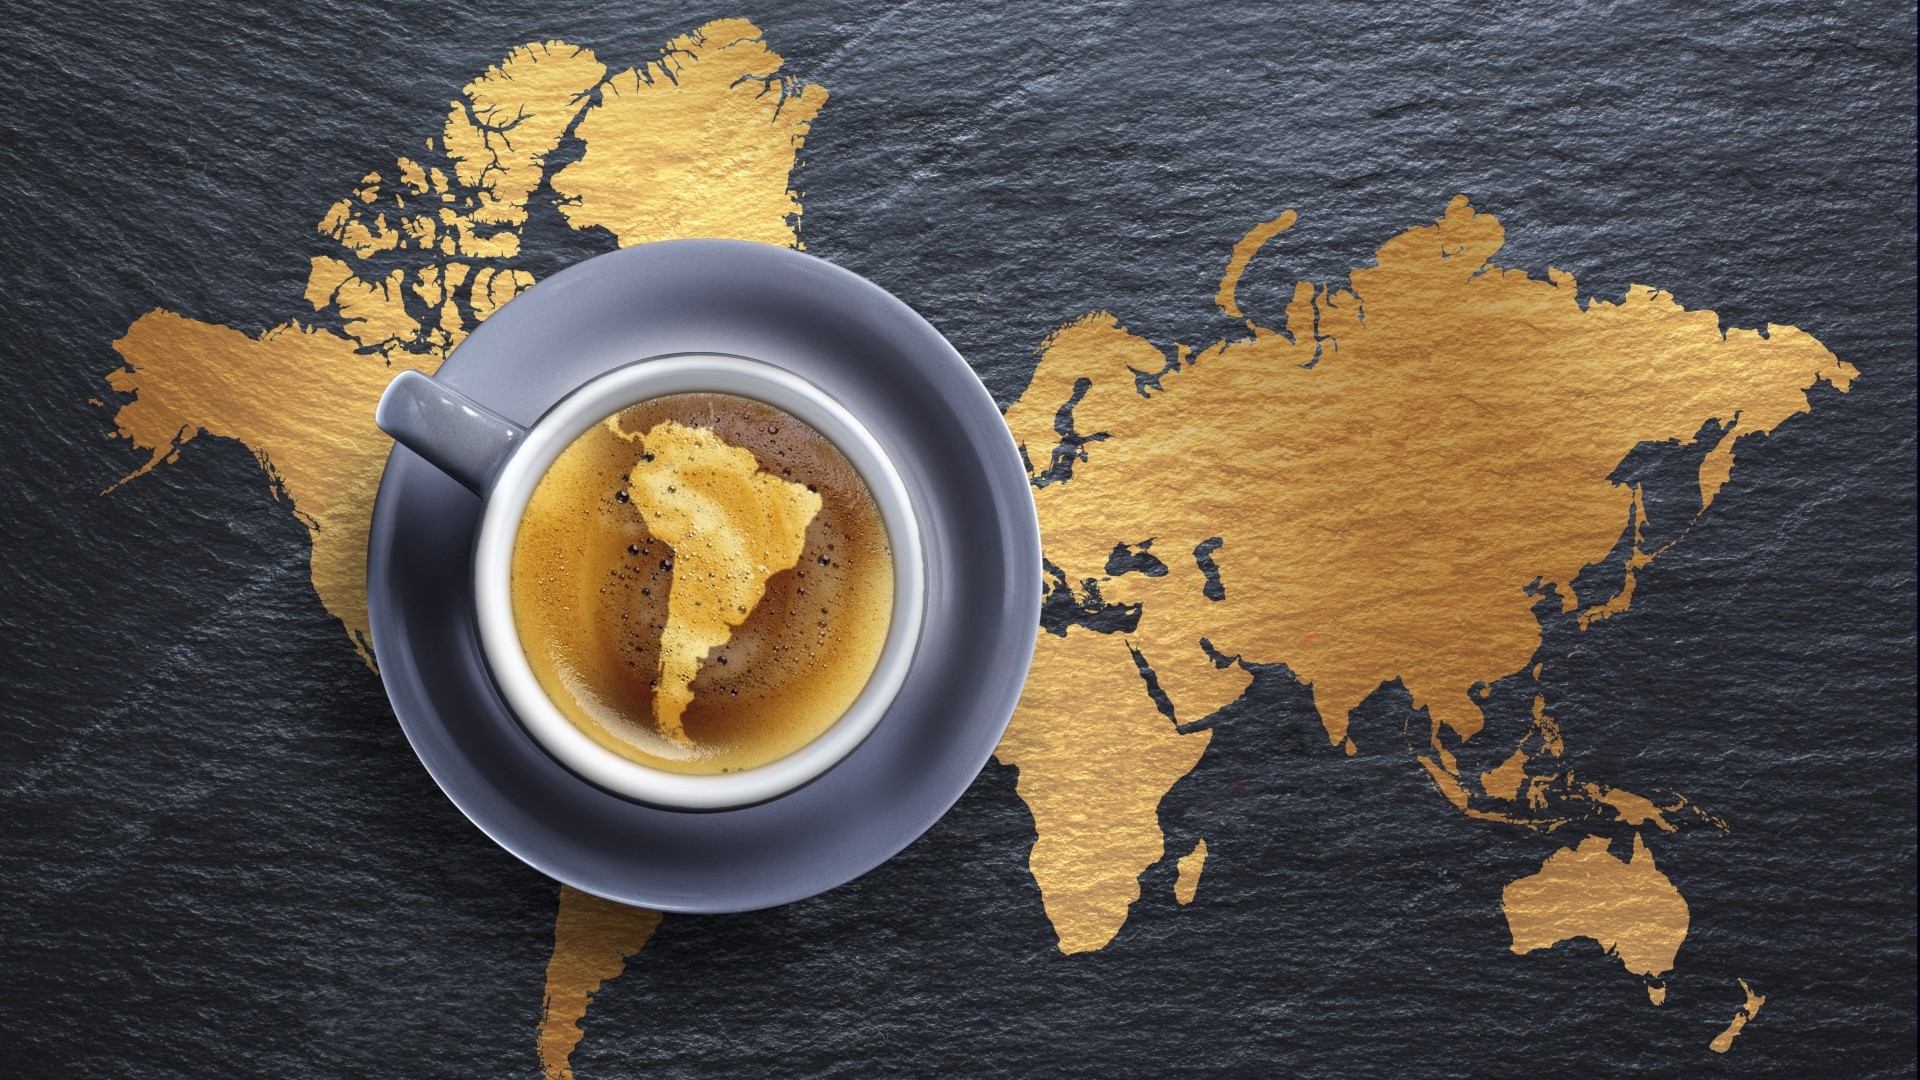 General 1920x1080 coffee map continents photo manipulation South America Earth Brazil wood world map